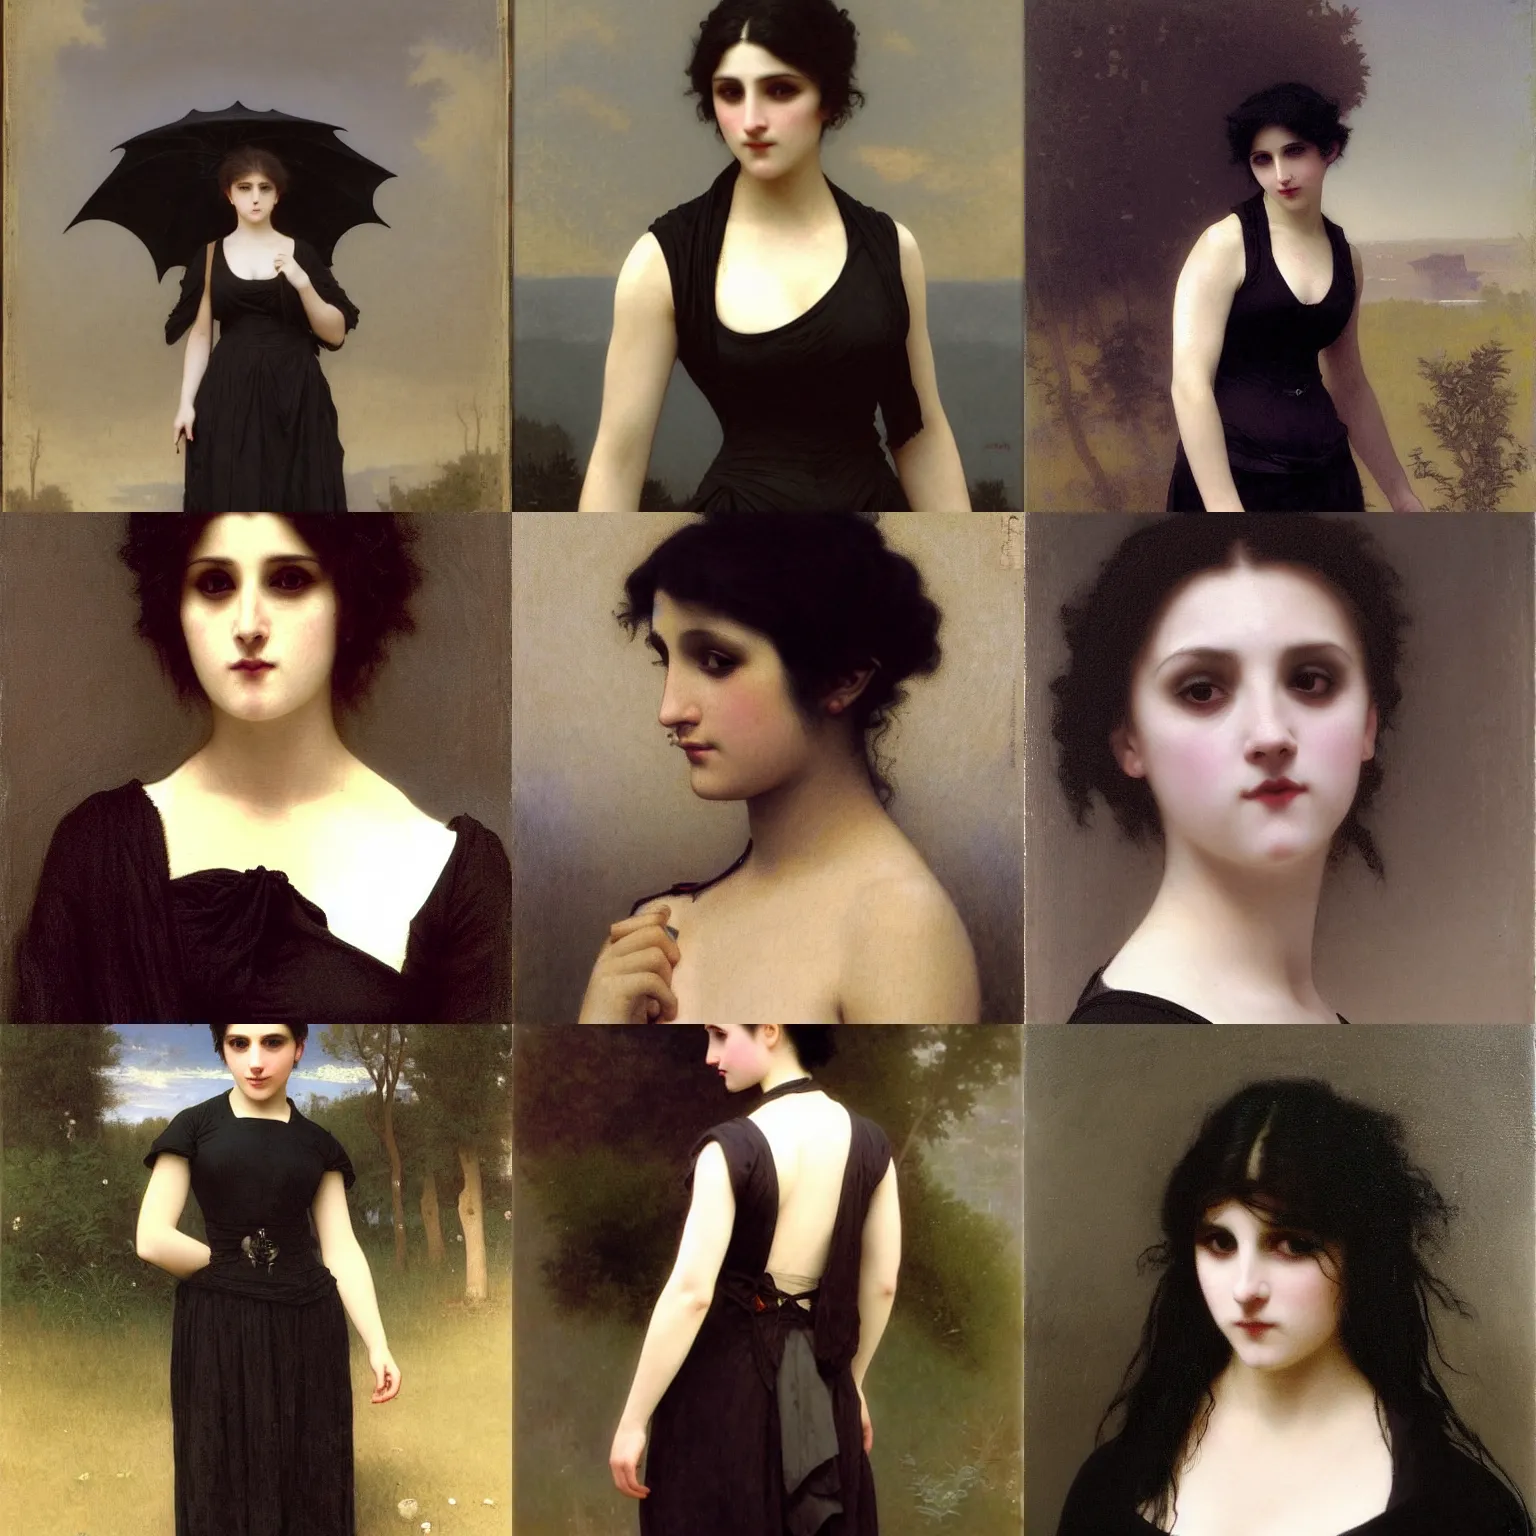 Prompt: A goth painted by William-Adolphe Bouguereau. Her hair is dark brown and cut into a short, messy pixie cut. She has a slightly rounded face, with a pointed chin, large entirely-black eyes, and a small nose. She is wearing a black tank top, a black leather jacket, a black knee-length skirt, a black choker, and black leather boots.